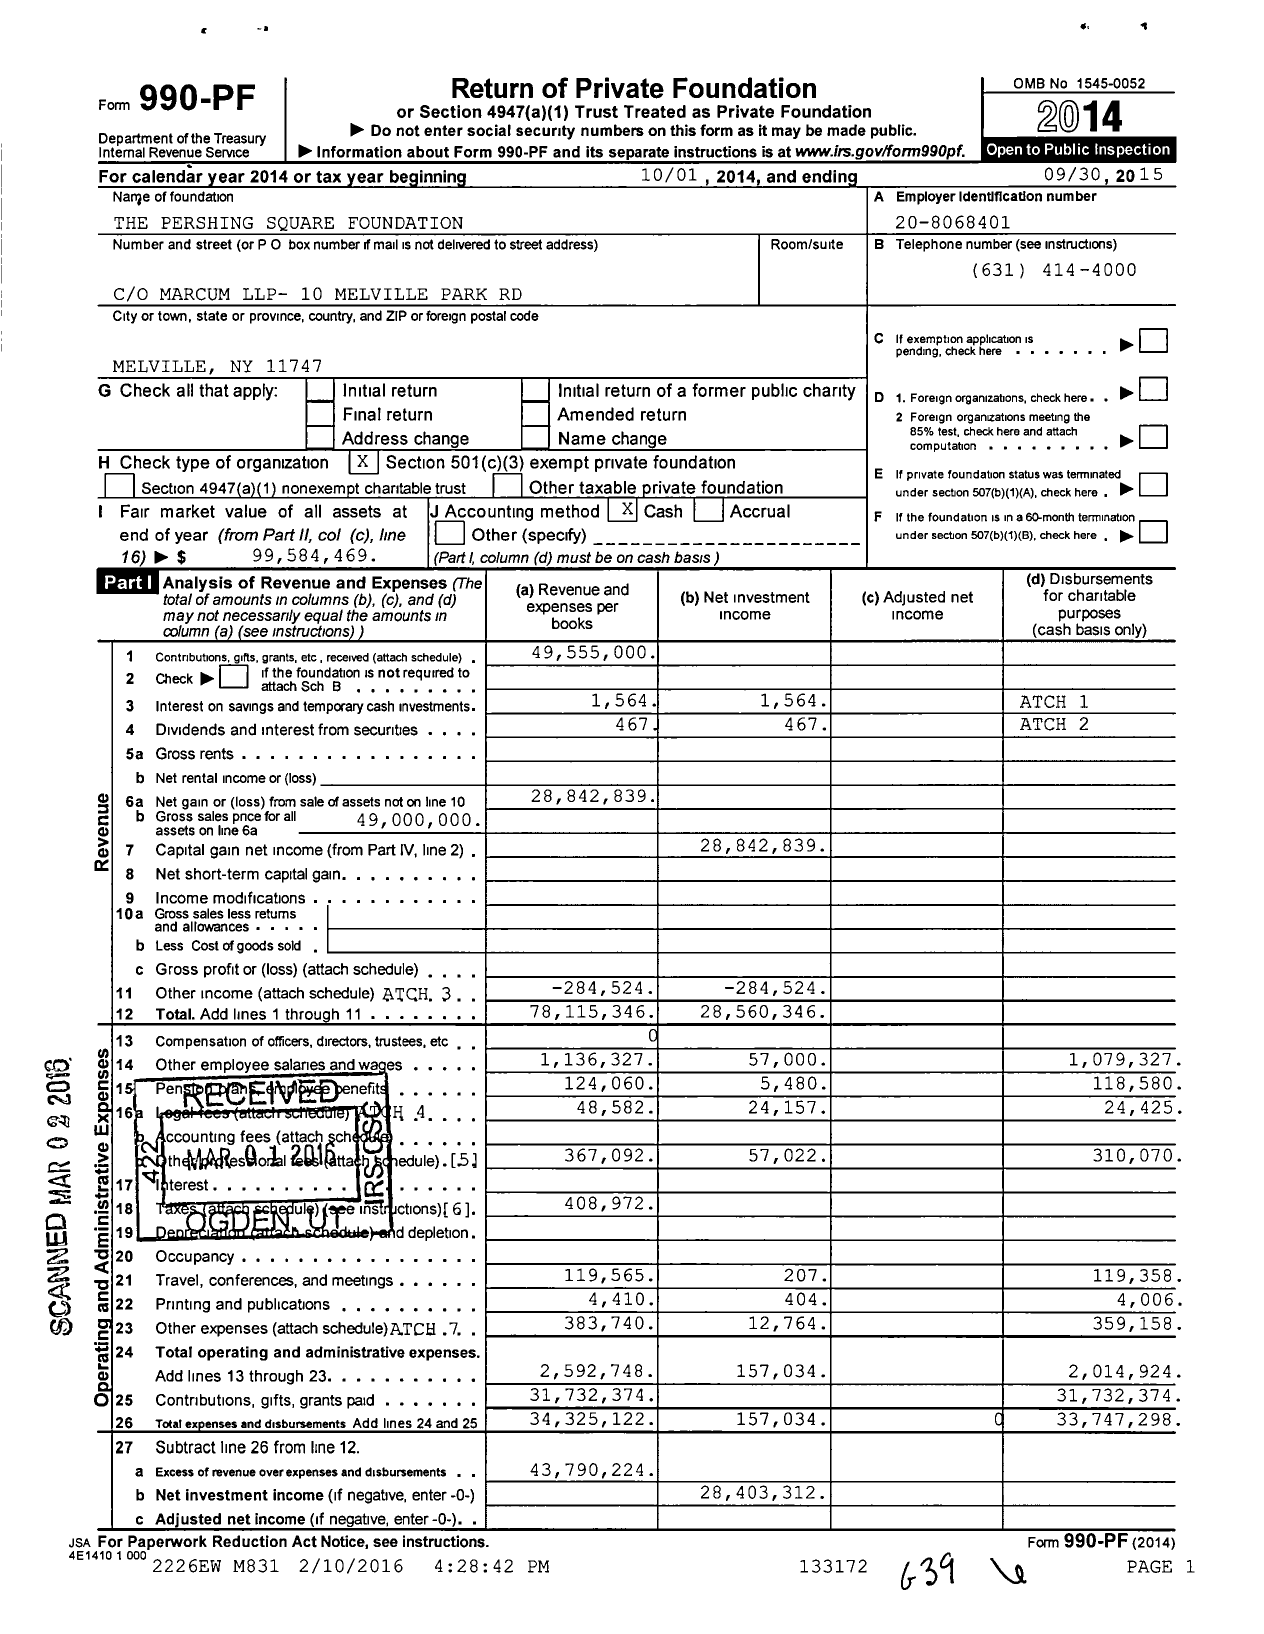 Image of first page of 2014 Form 990PF for Pershing Square Foundation (PSF)